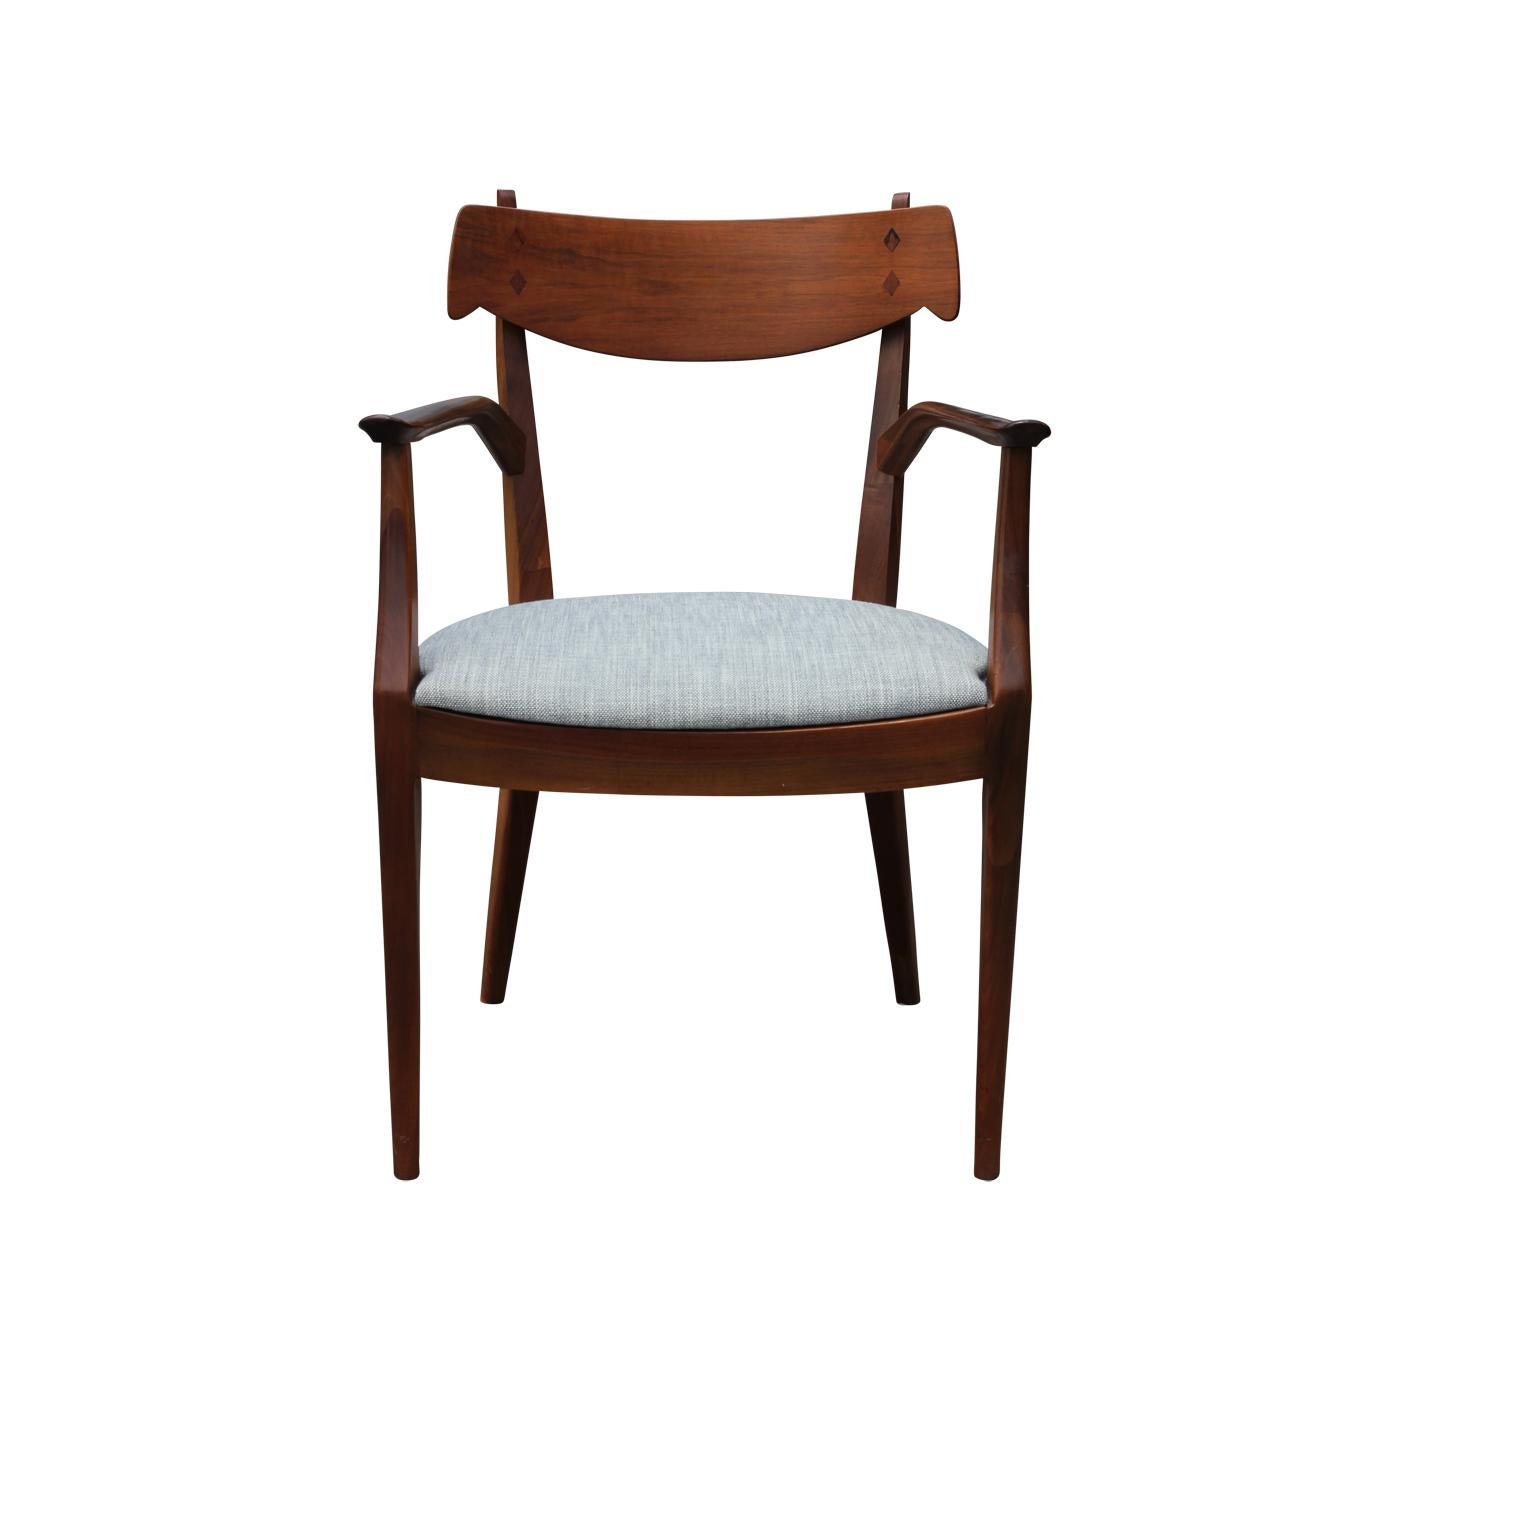 Set of 8 modern dining room chairs by Drexel Declaration. The chairs have grey fabric on the seats and only one of the chairs have arms.
Measures: Armchair height H 25.5 in.